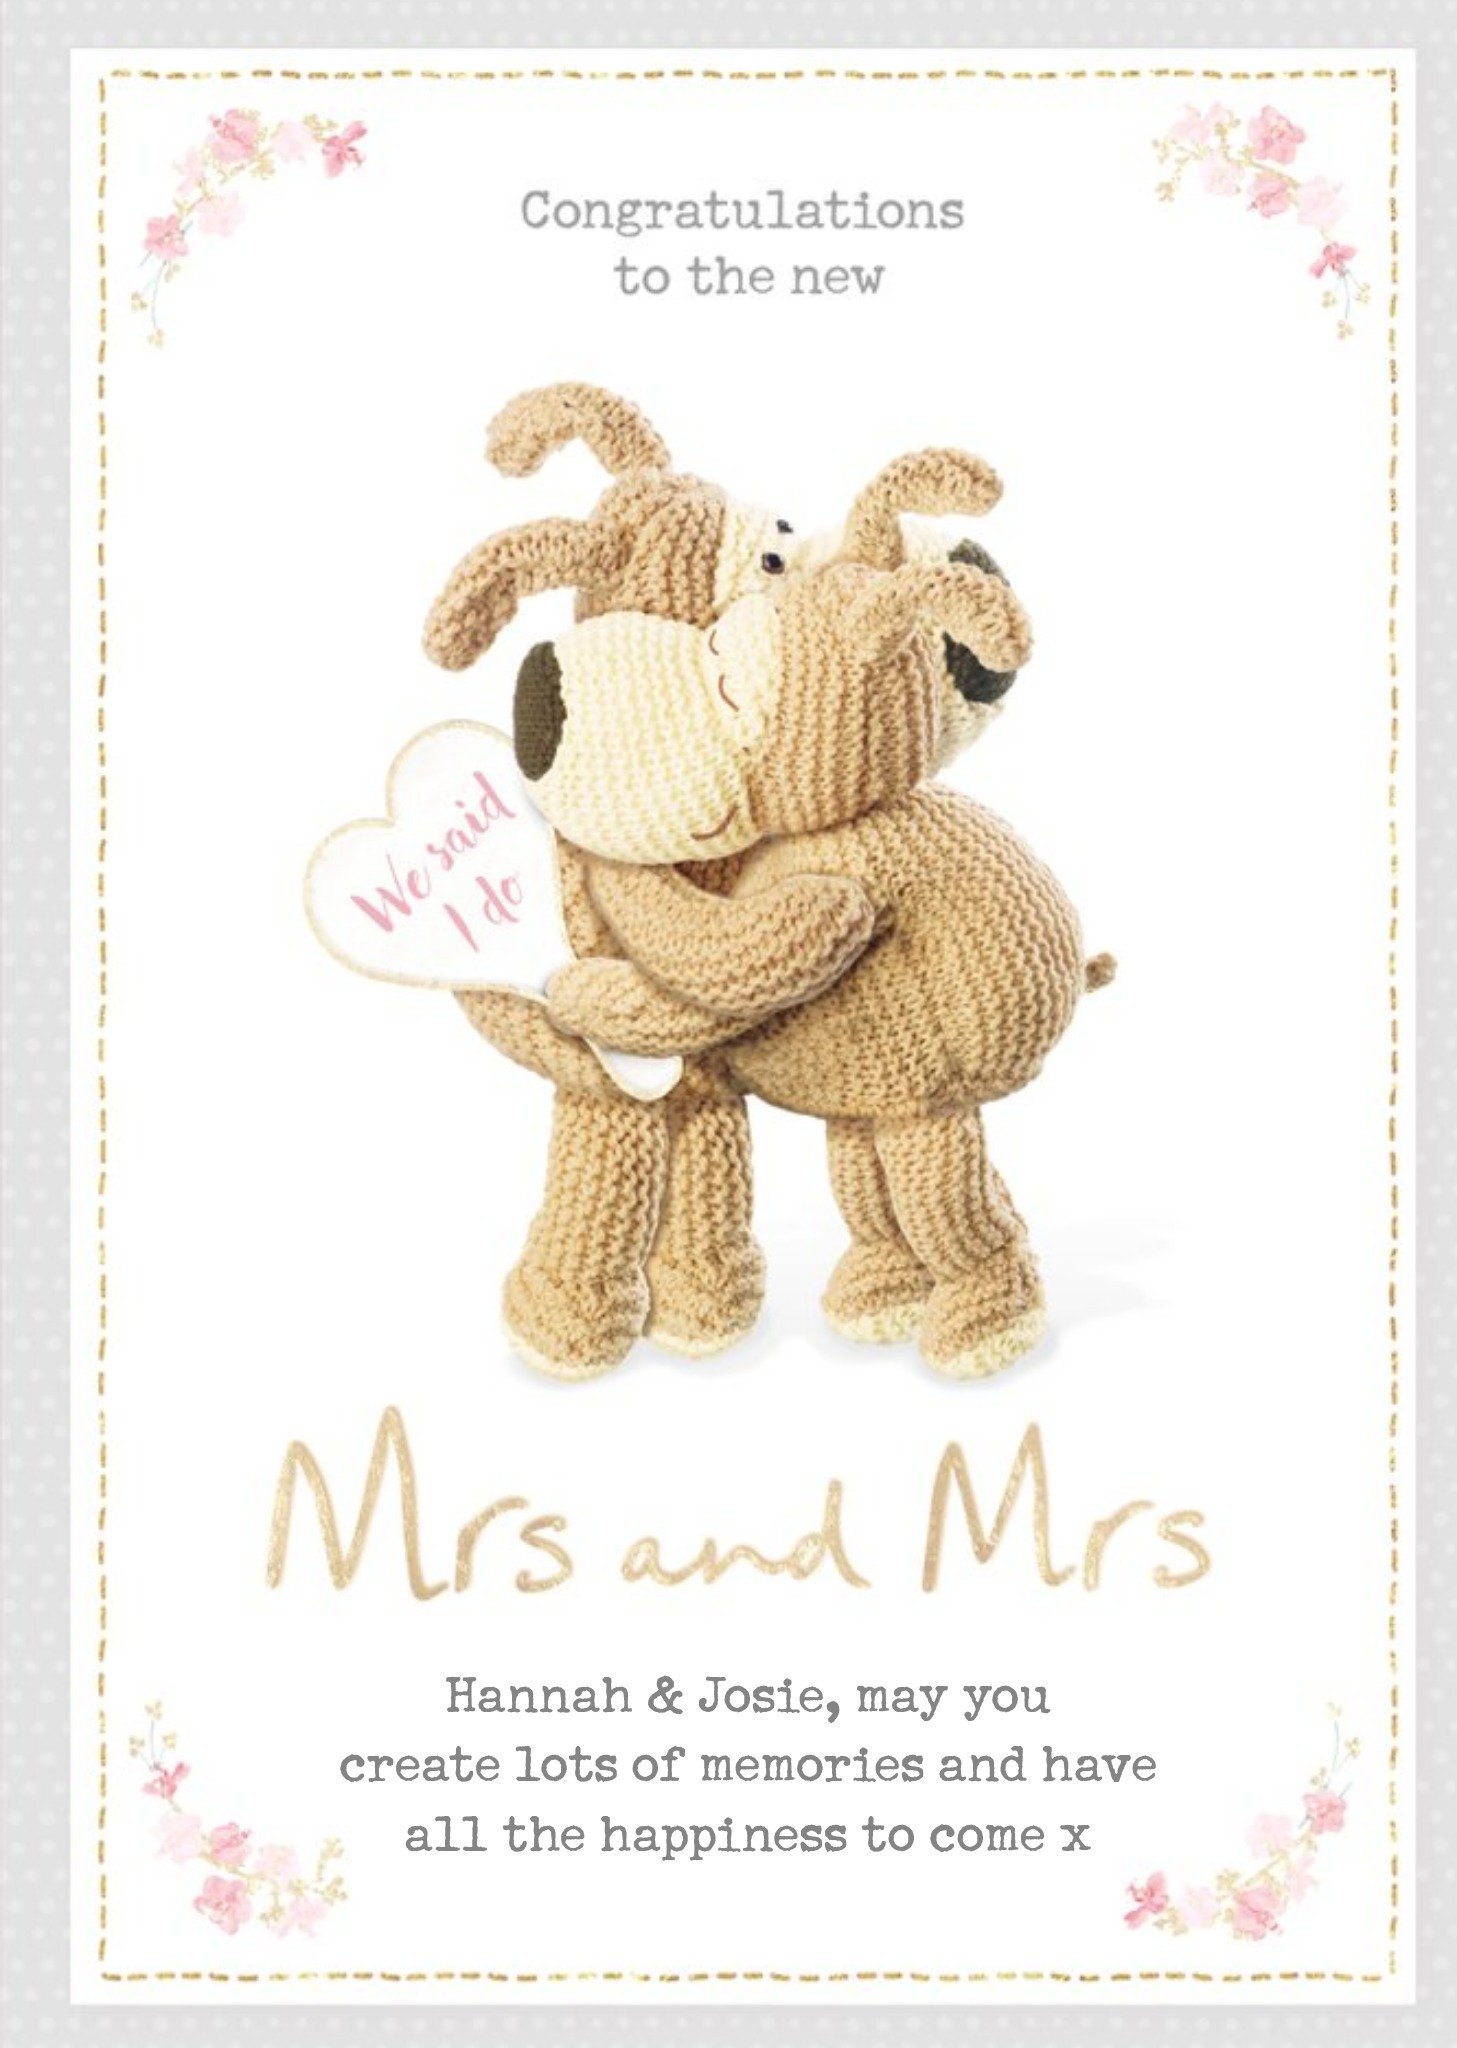 Boofle Sentimental Wedding Day Card Congratulations To The New Mrs & Mrs, Large